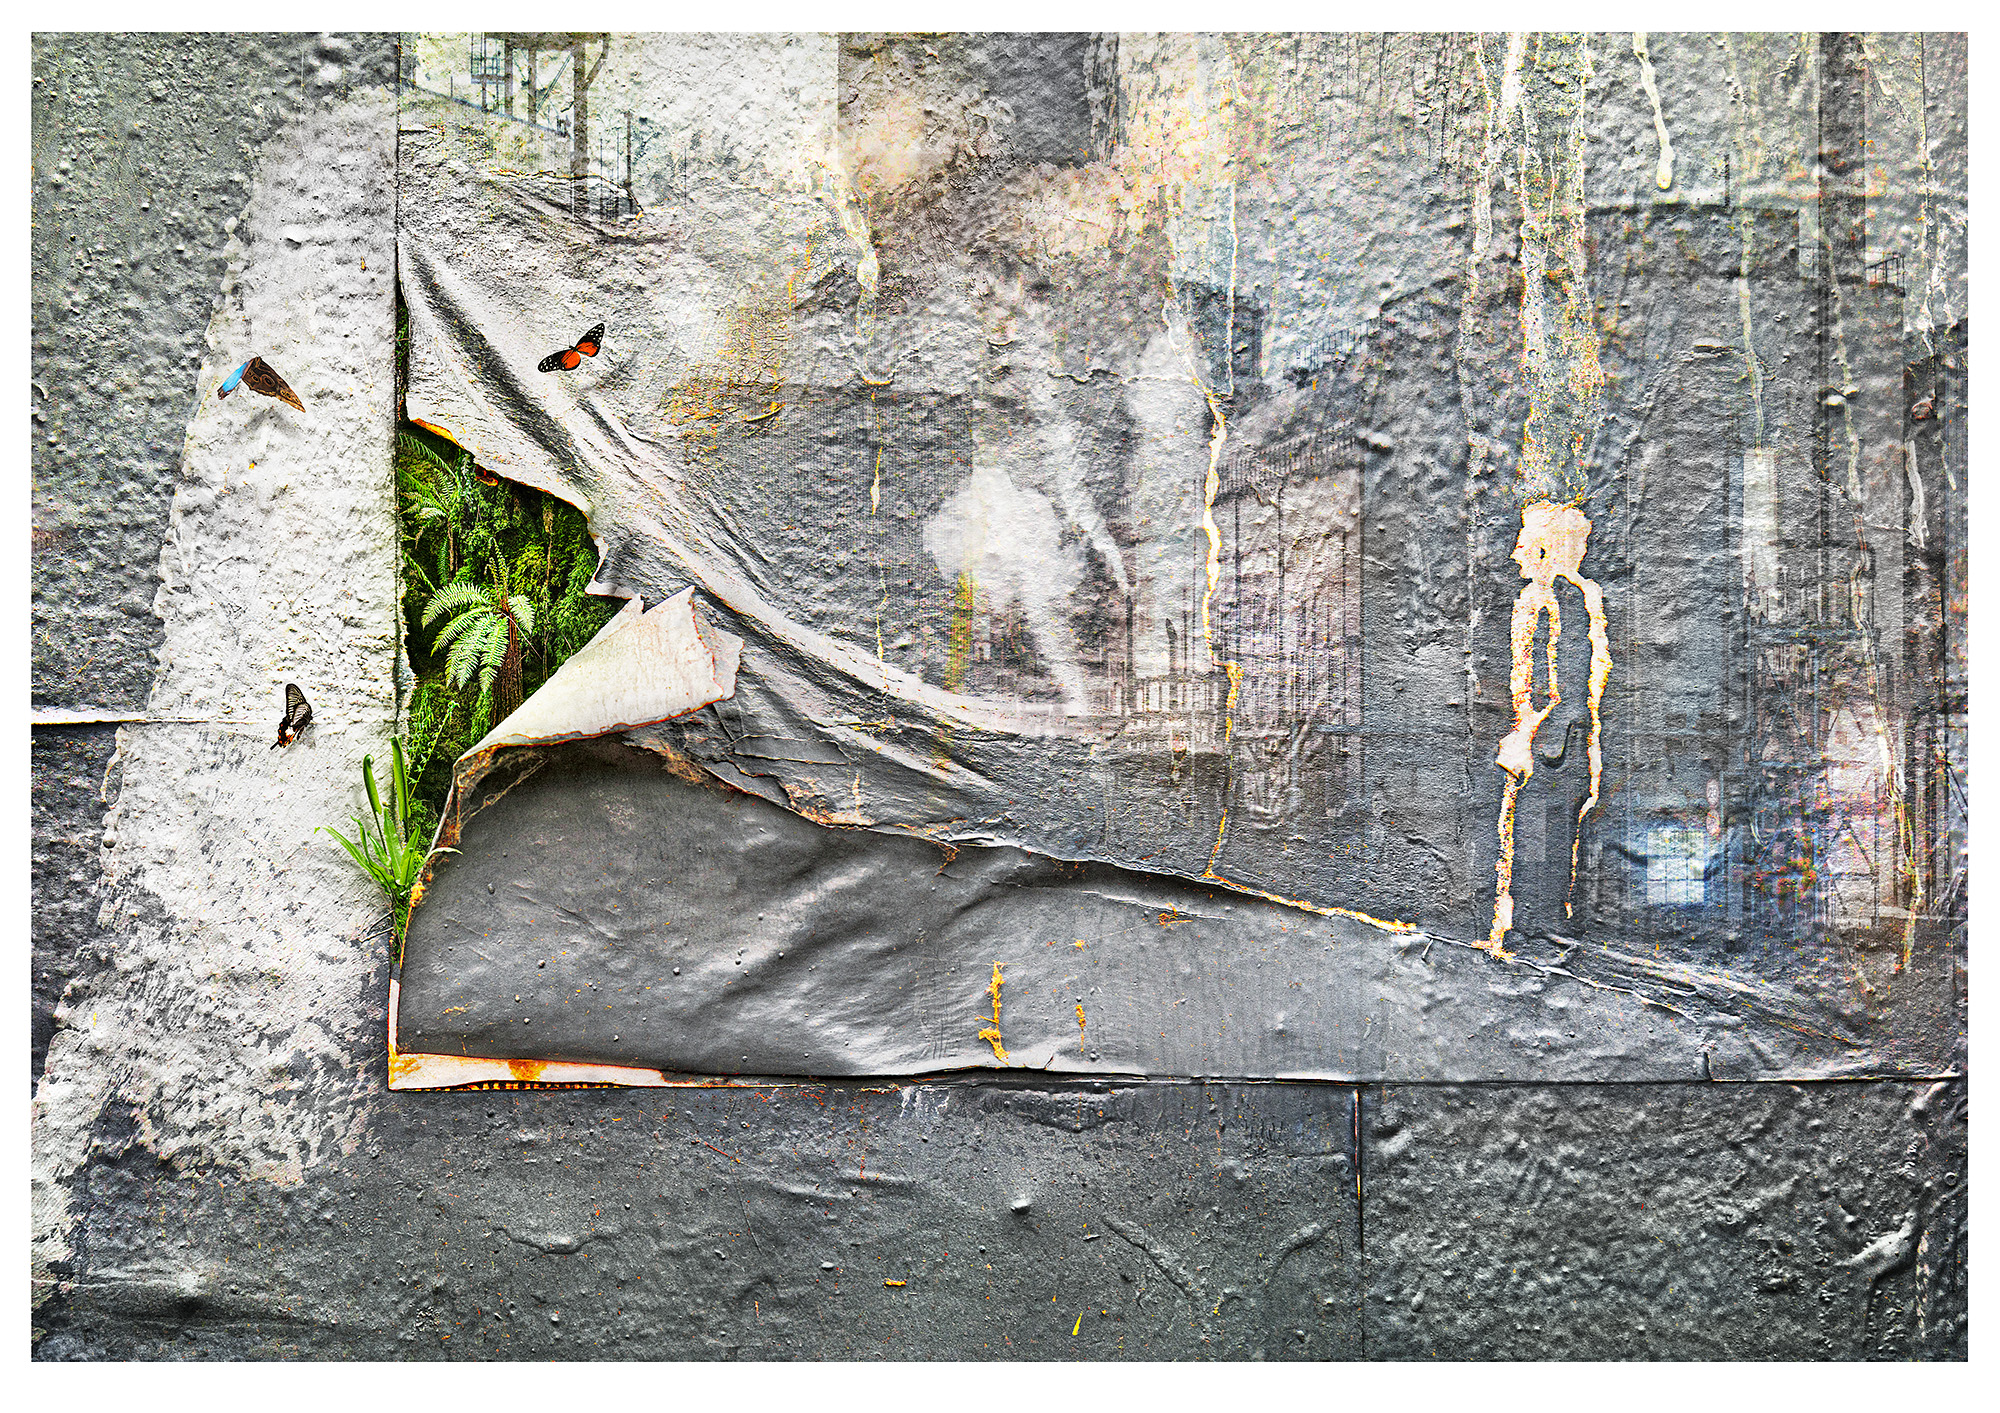 Composite photograph of textured wall with some peeling paper. Poking from the peeling are exotic lush green plants, whilst being overlooked by the form of a man made from dripped paint. The main part of the wall has industrial buildings superimposed.